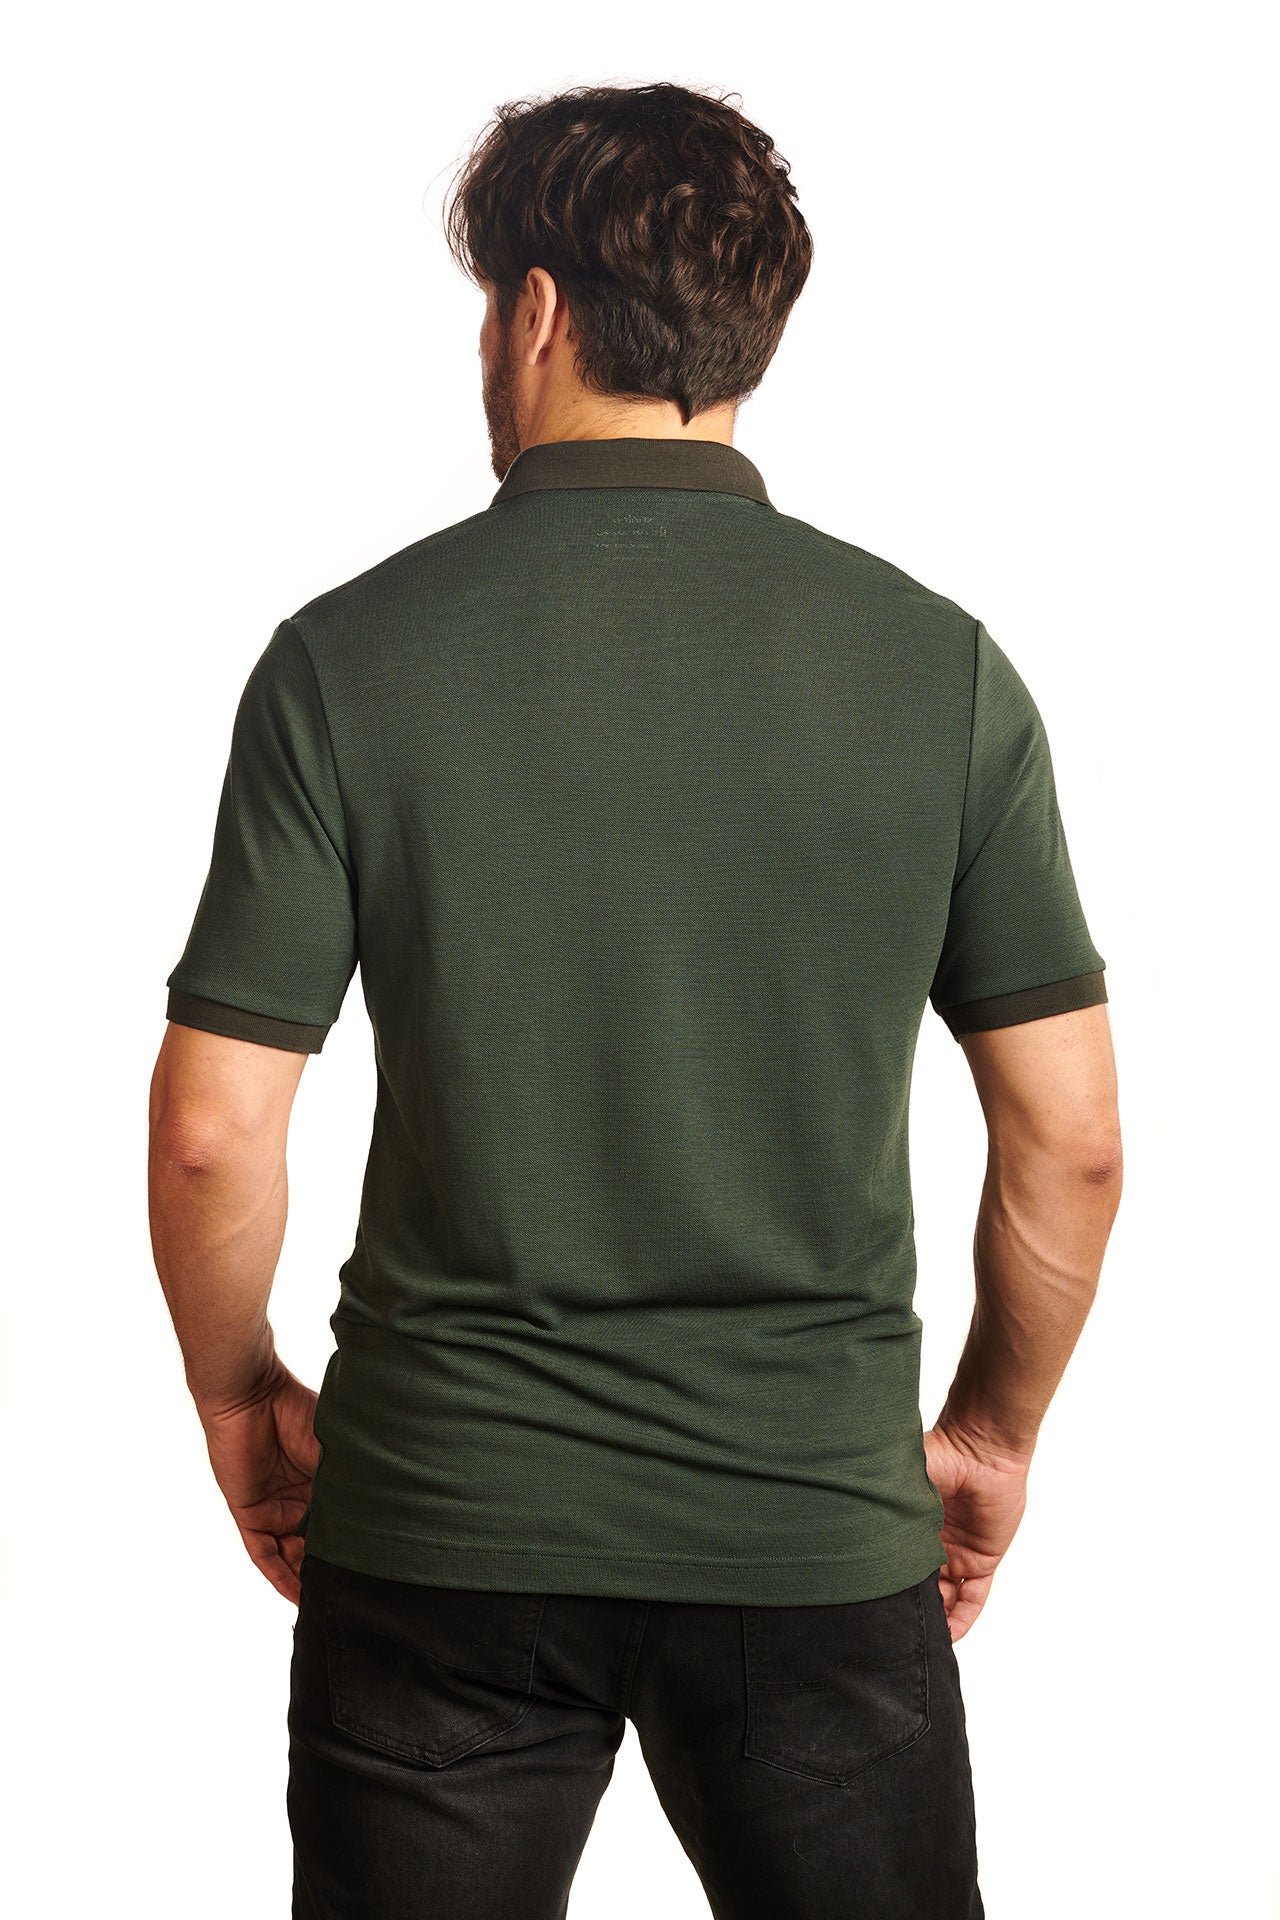 pine-green-mix-biodegradable-pure-merino-wool-golf-polo-shirt-for men-by-snöleo.-back-of-model-view.